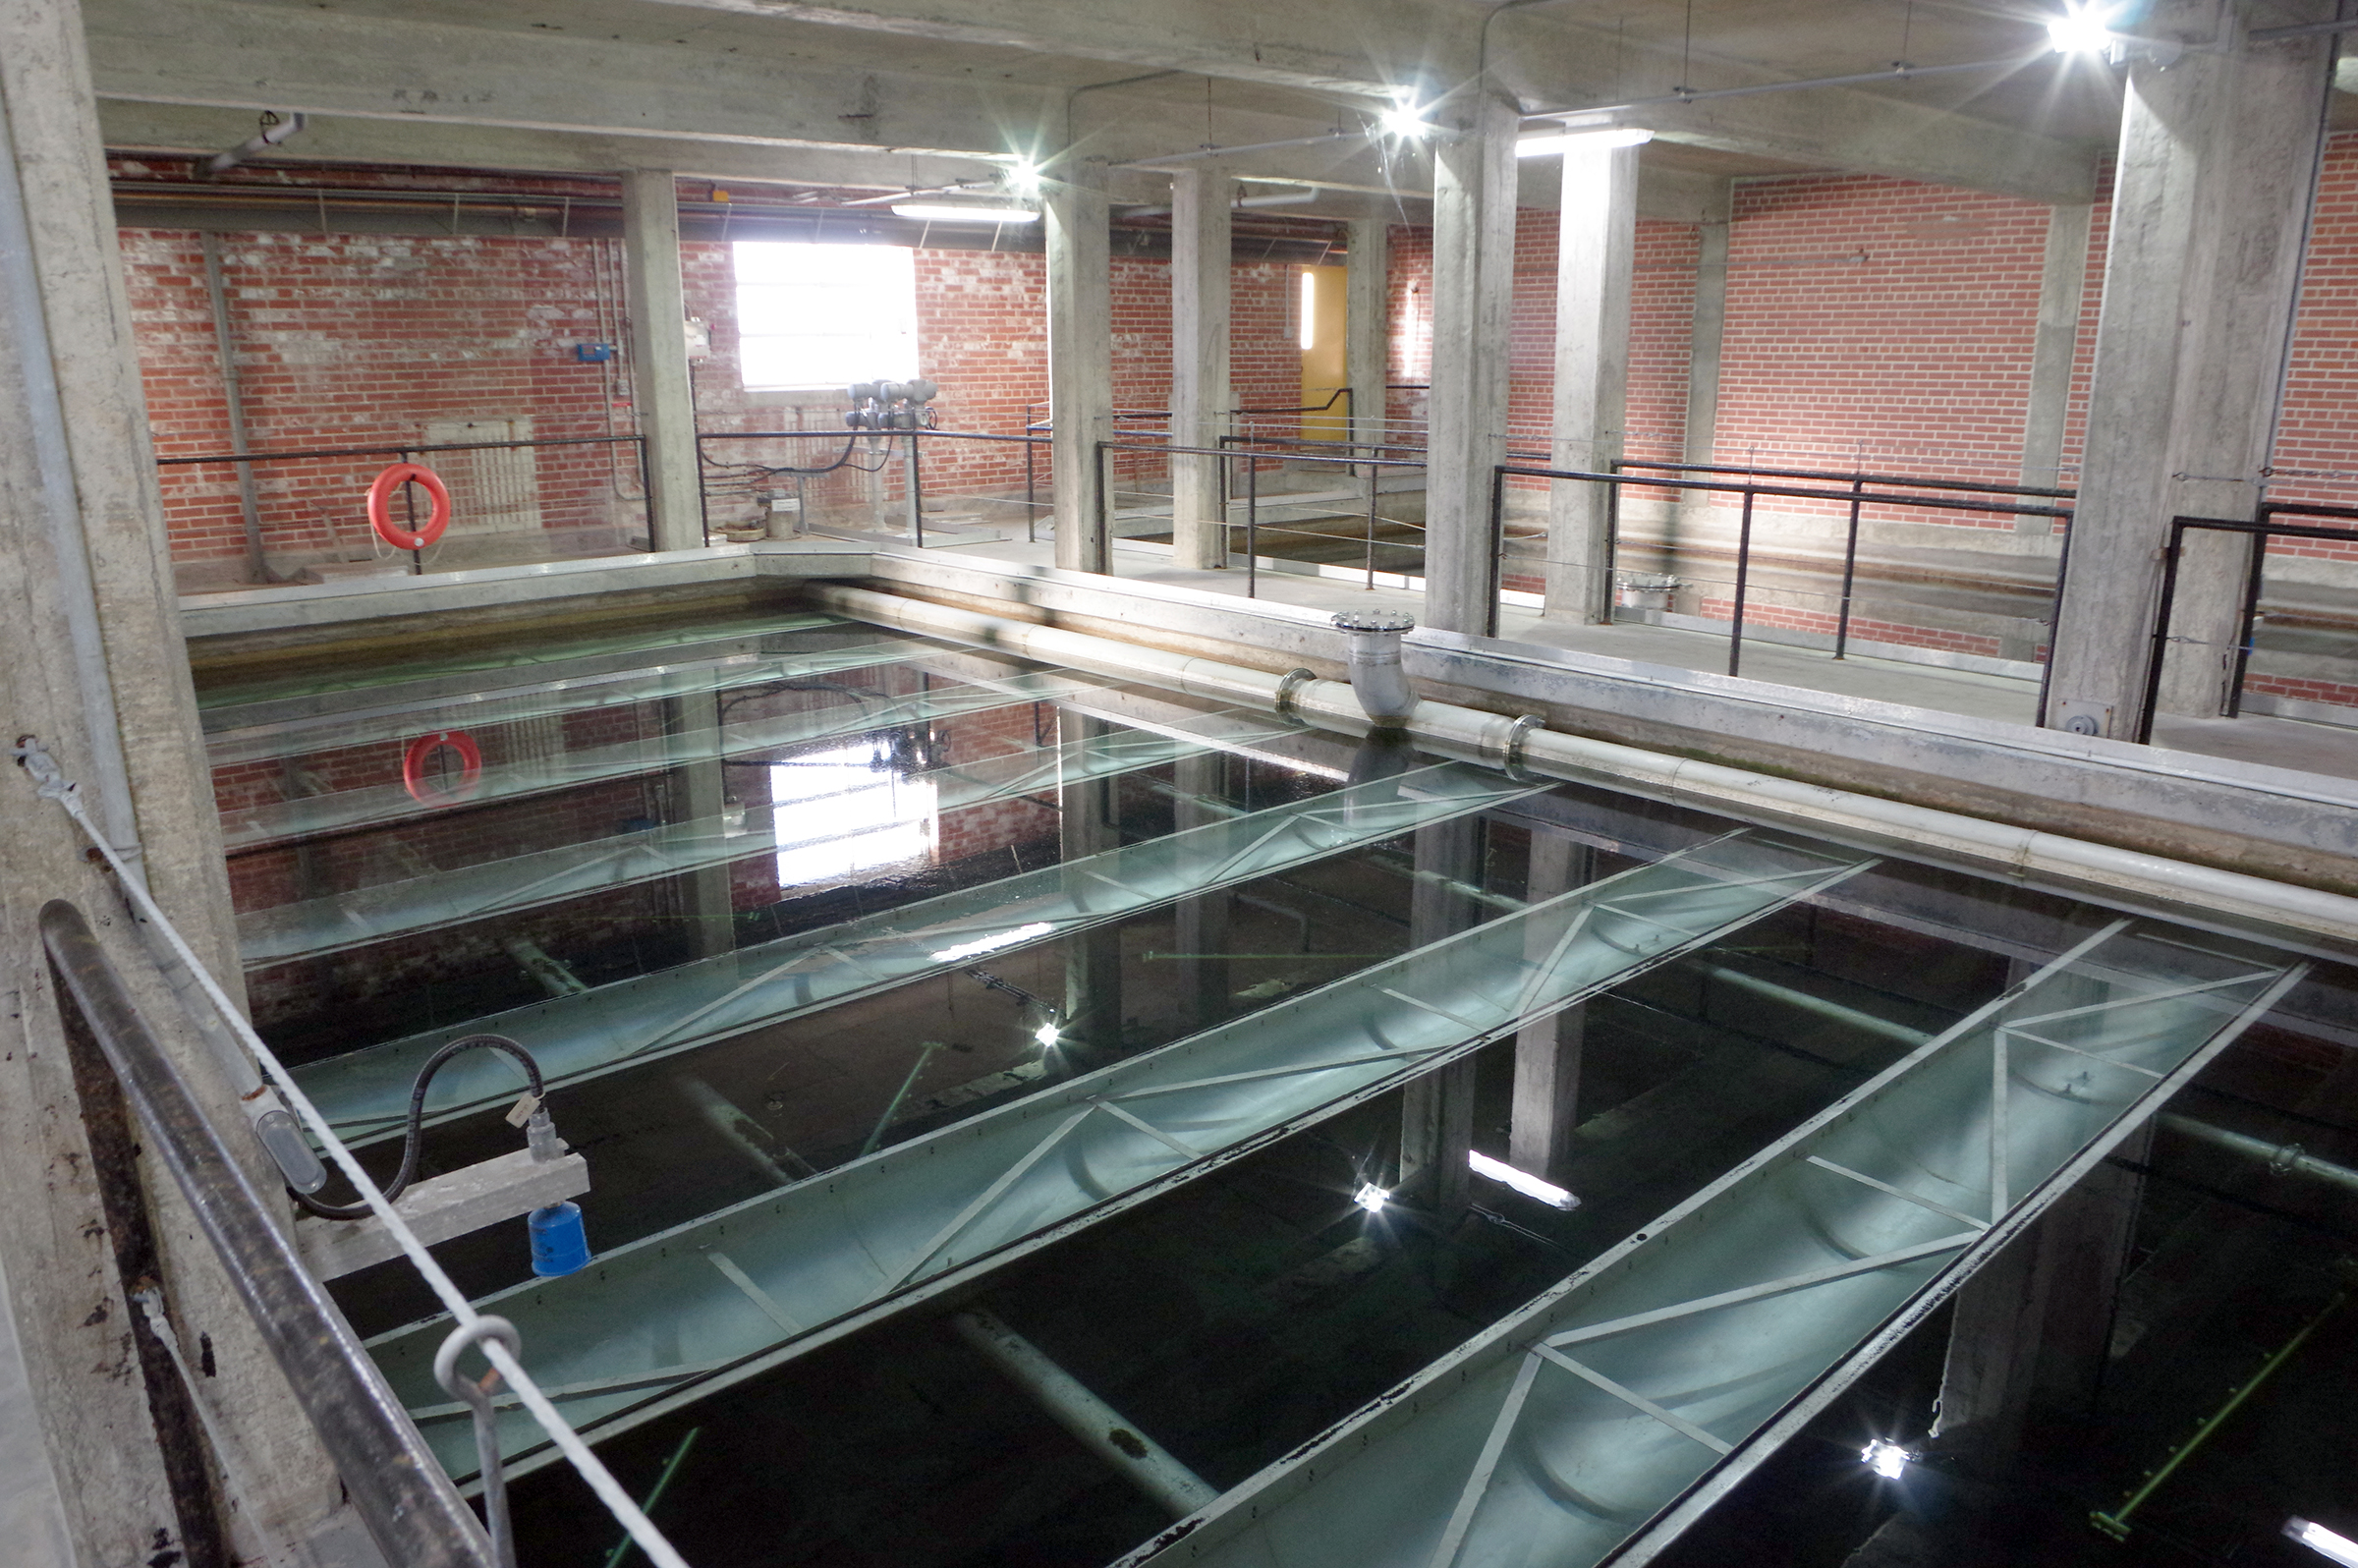 Water treatment operators help ensure water quality, at the King Street Water Treatment Plant